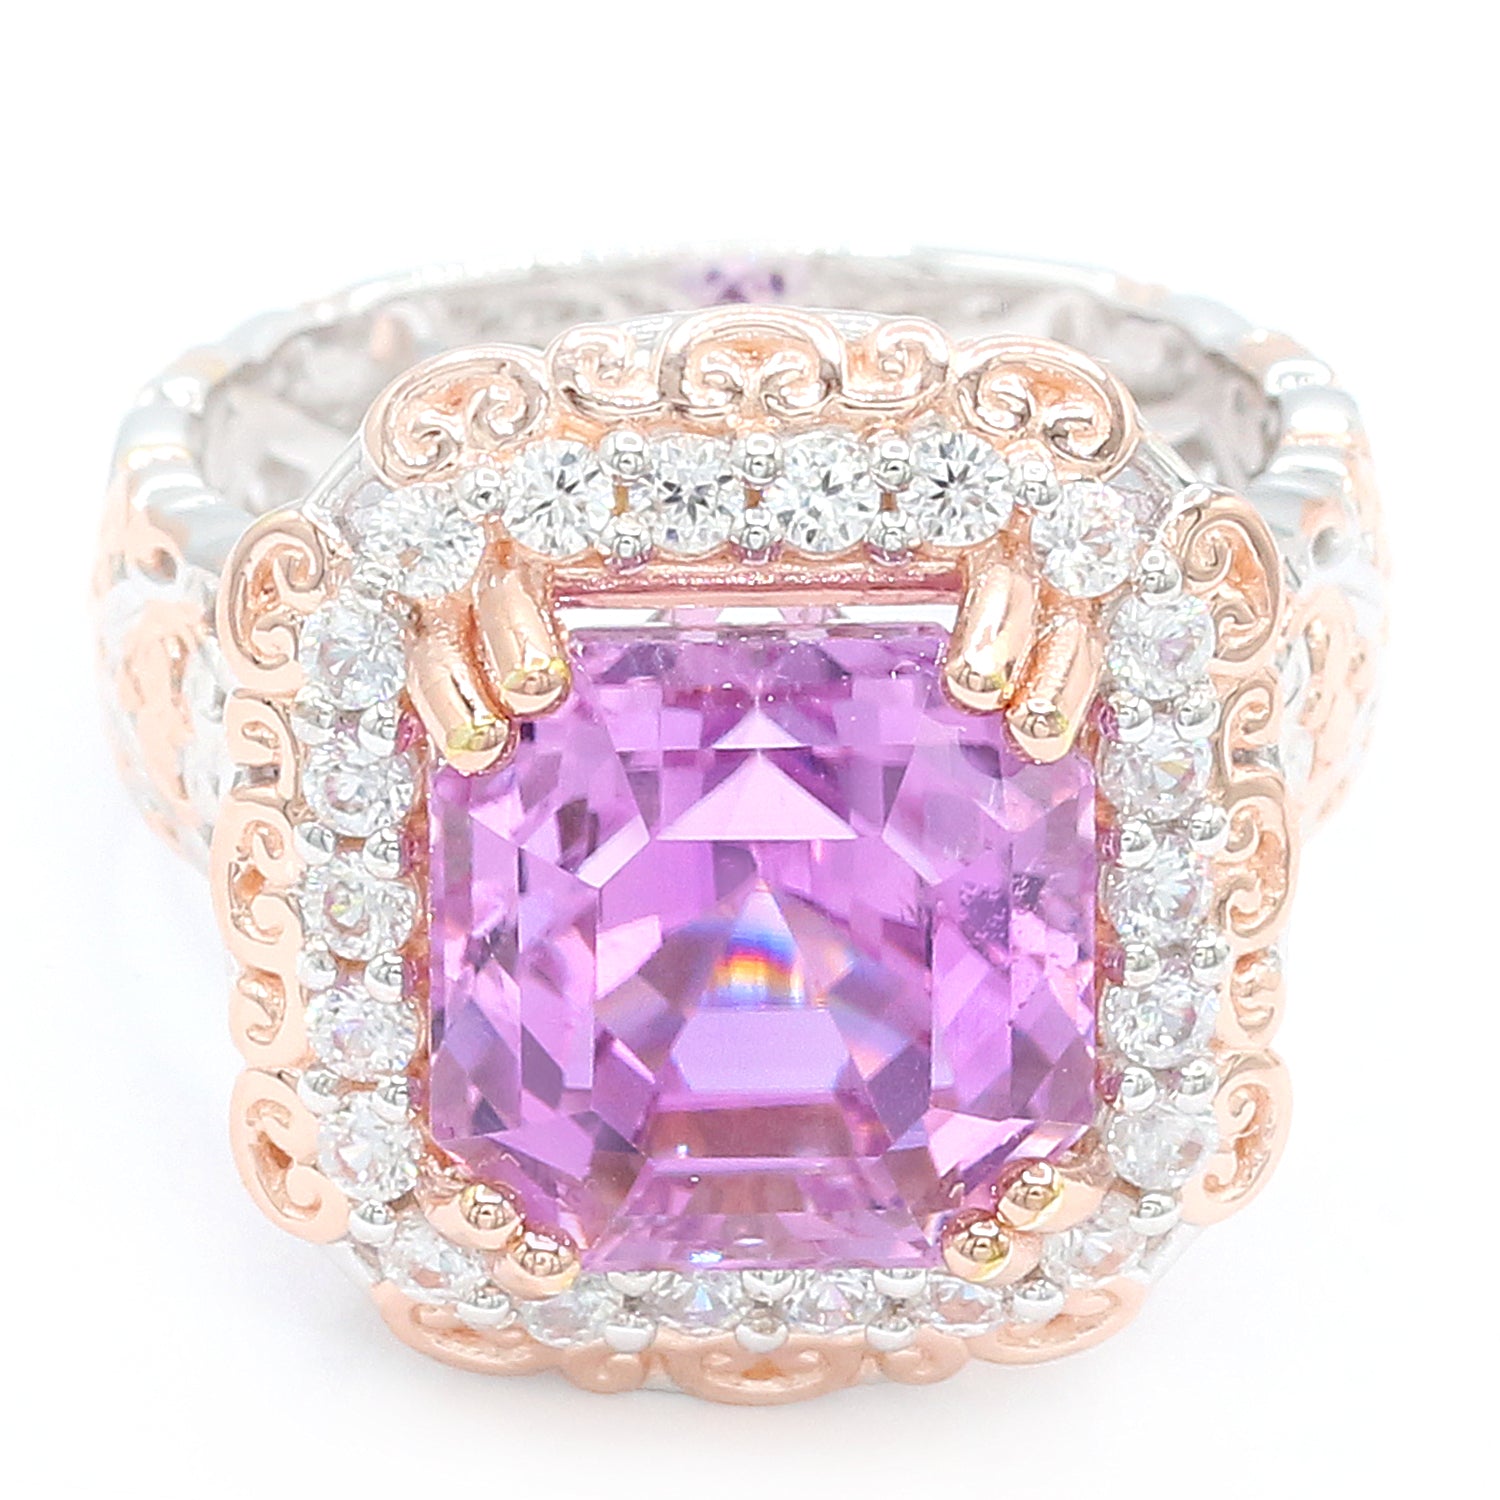 Limited Edition Gems en Vogue Luxe One-of-a-Kind 12.24ctw Kunzite & White Zircon Halo Ring